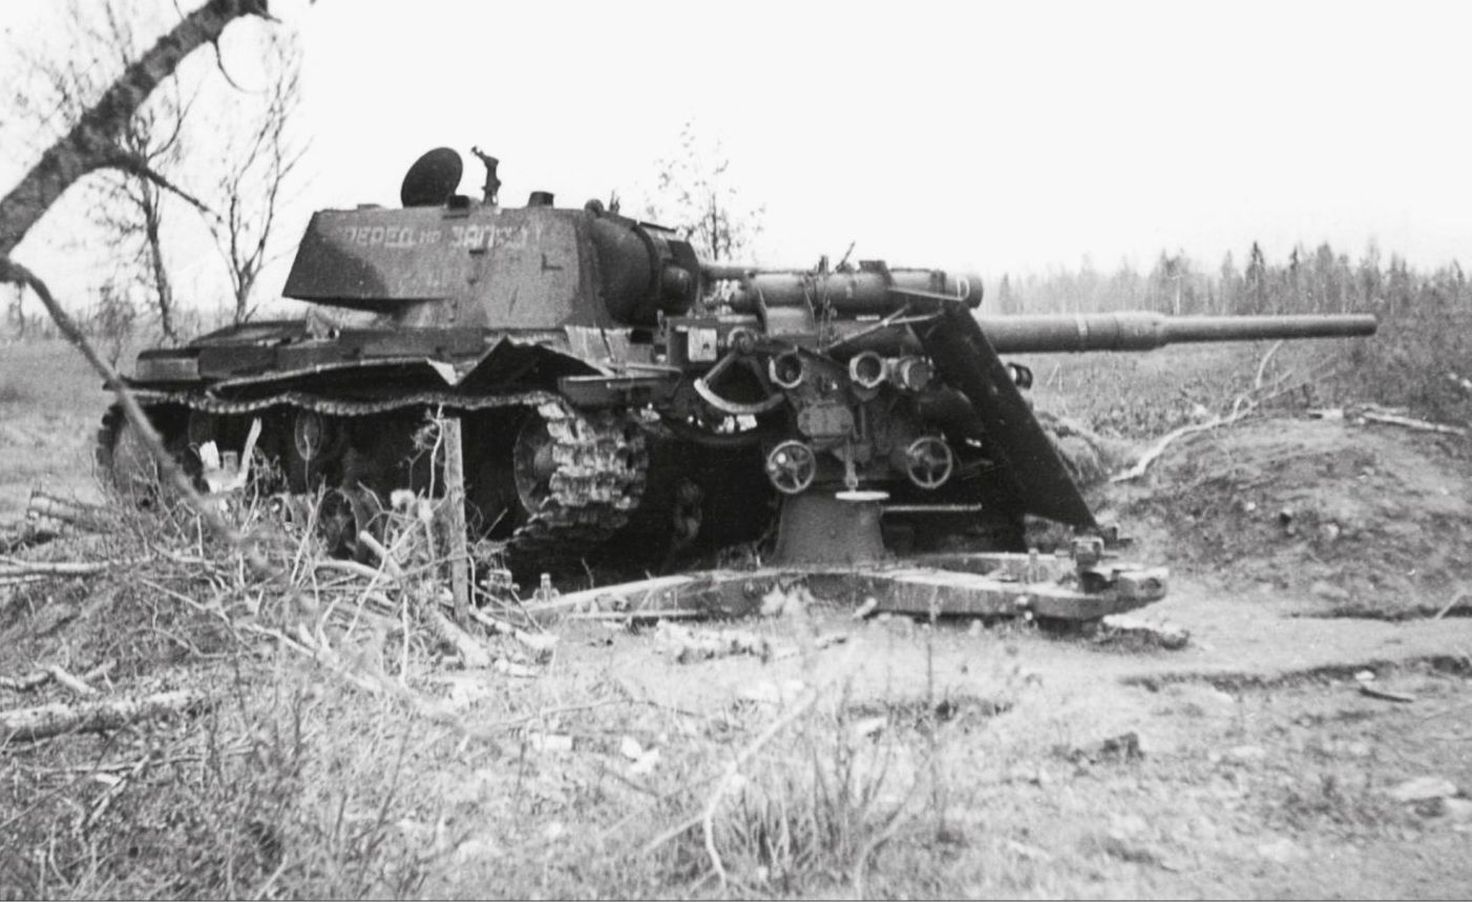 KV-8 heavy flame thrower tank and Flak 88, 1942